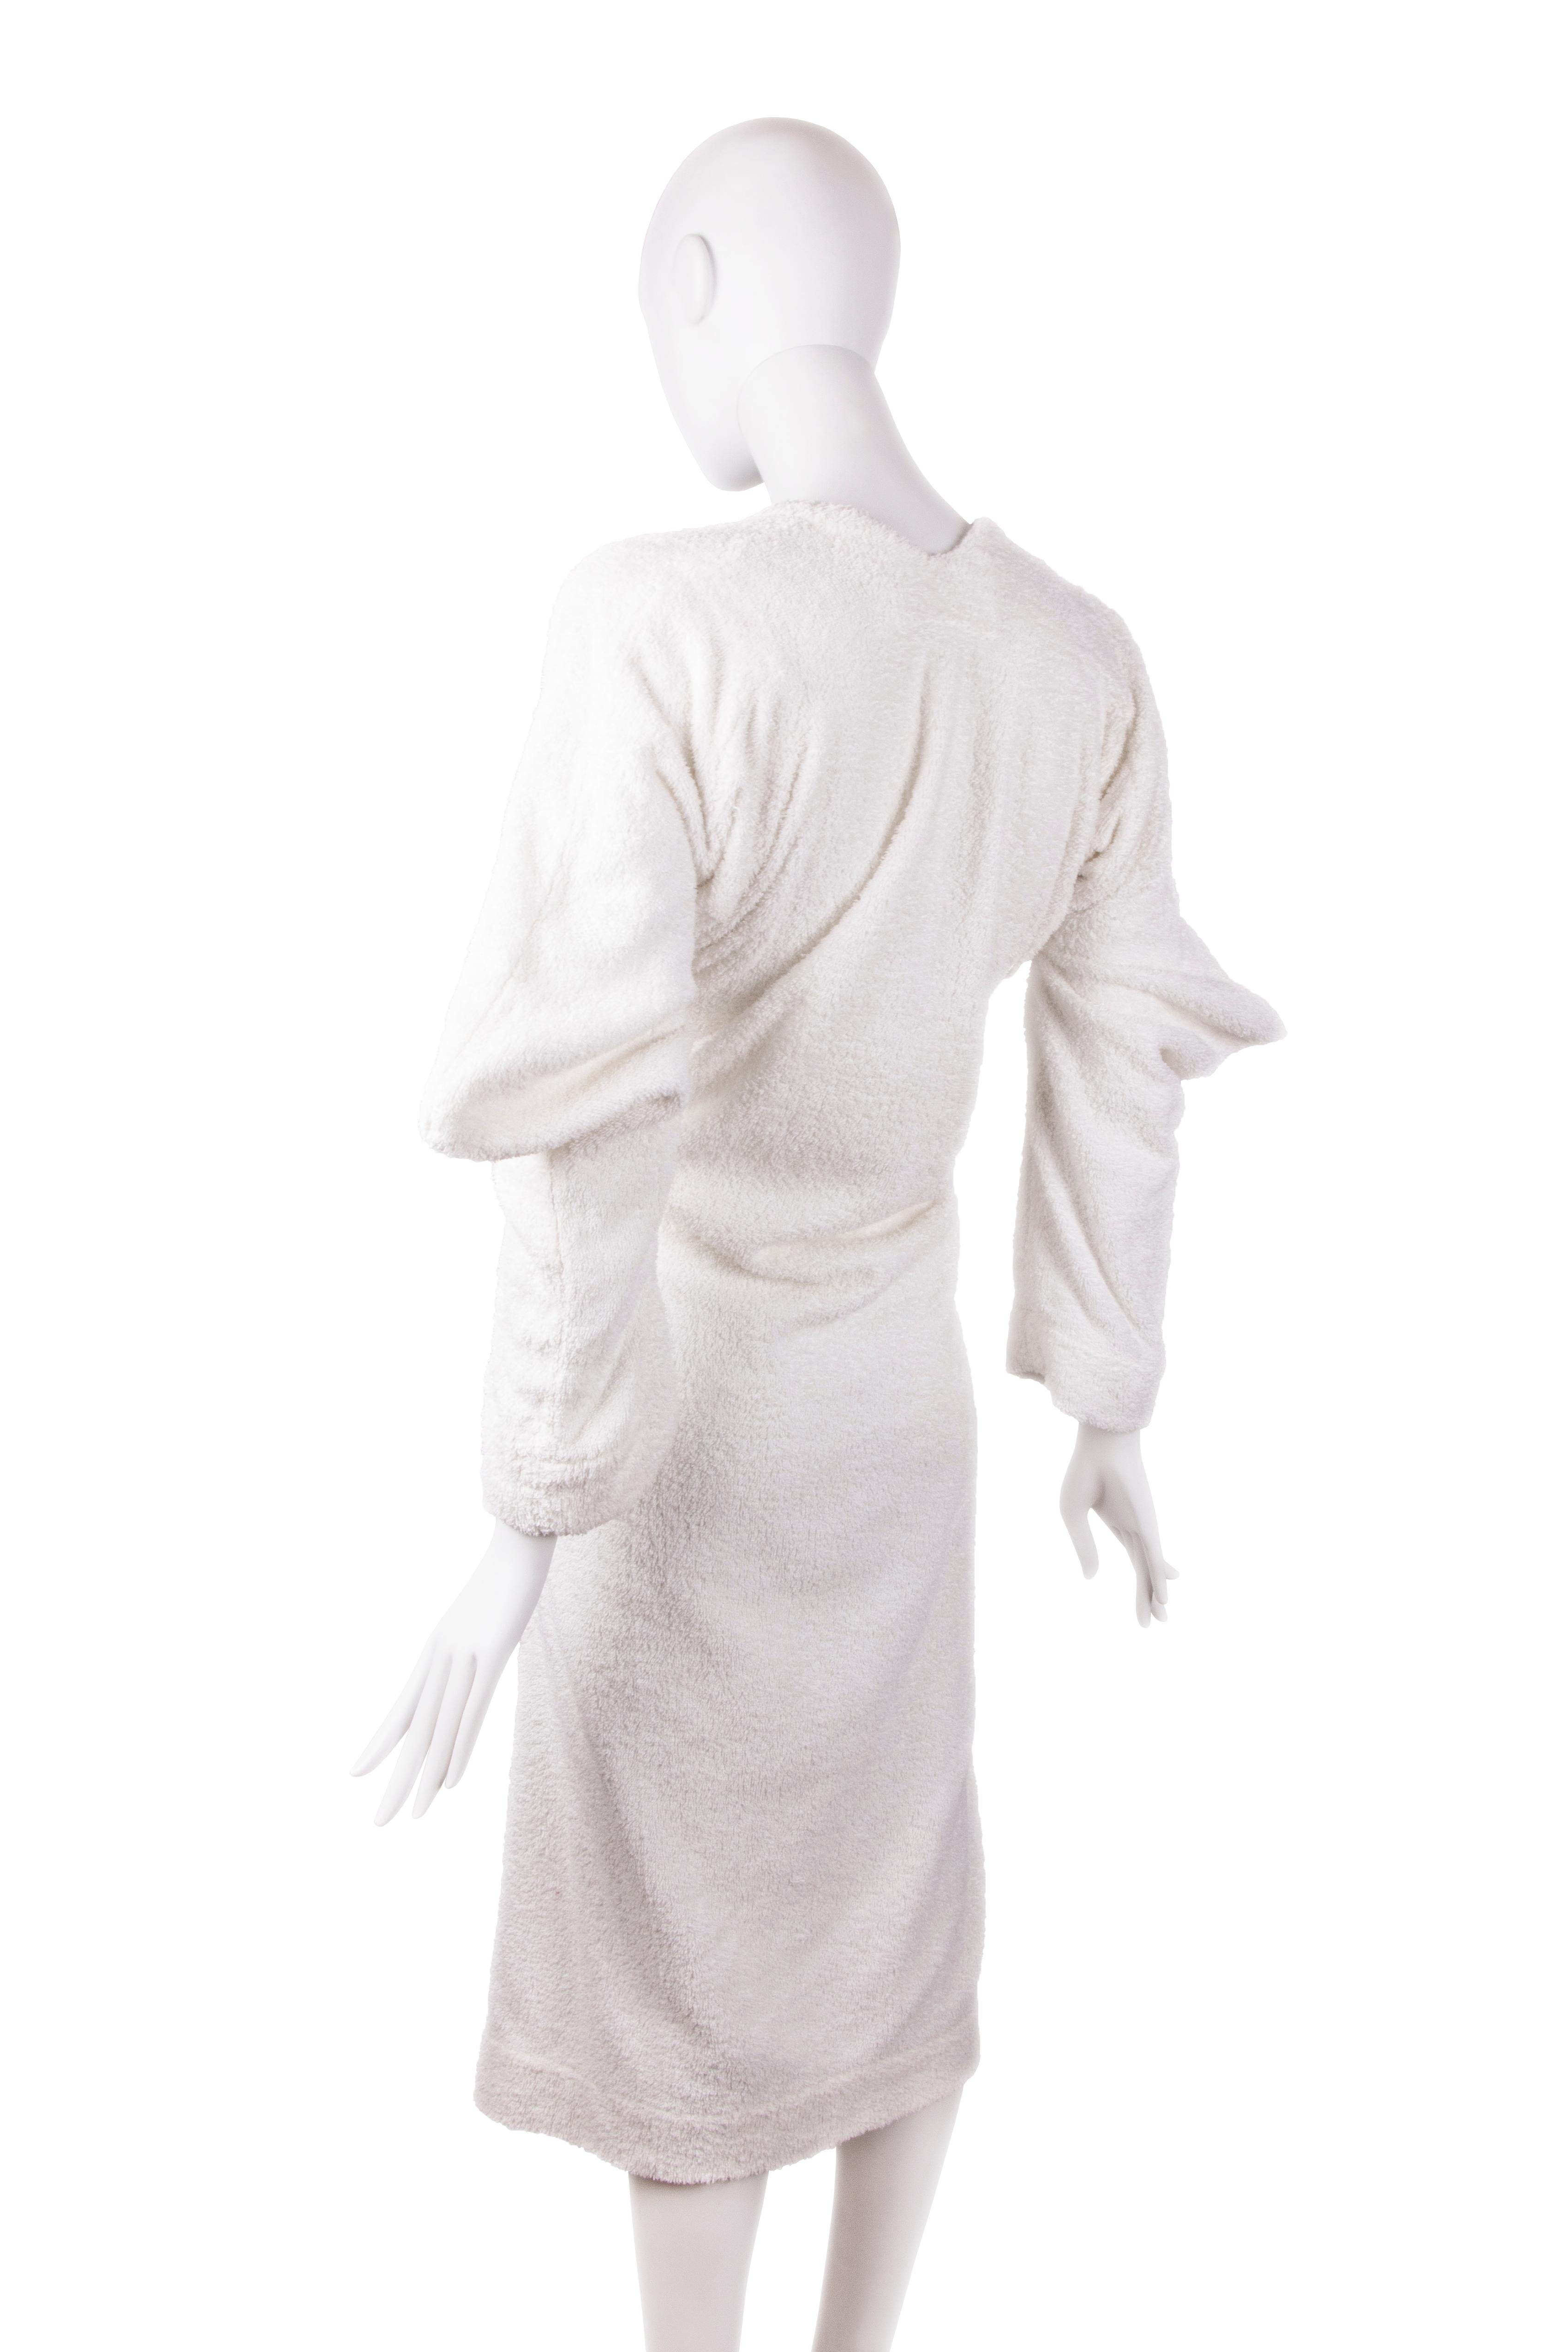 Worlds End by Vivienne Westwood cotton toweling 'Witches' dress, fw 1983 For Sale 3